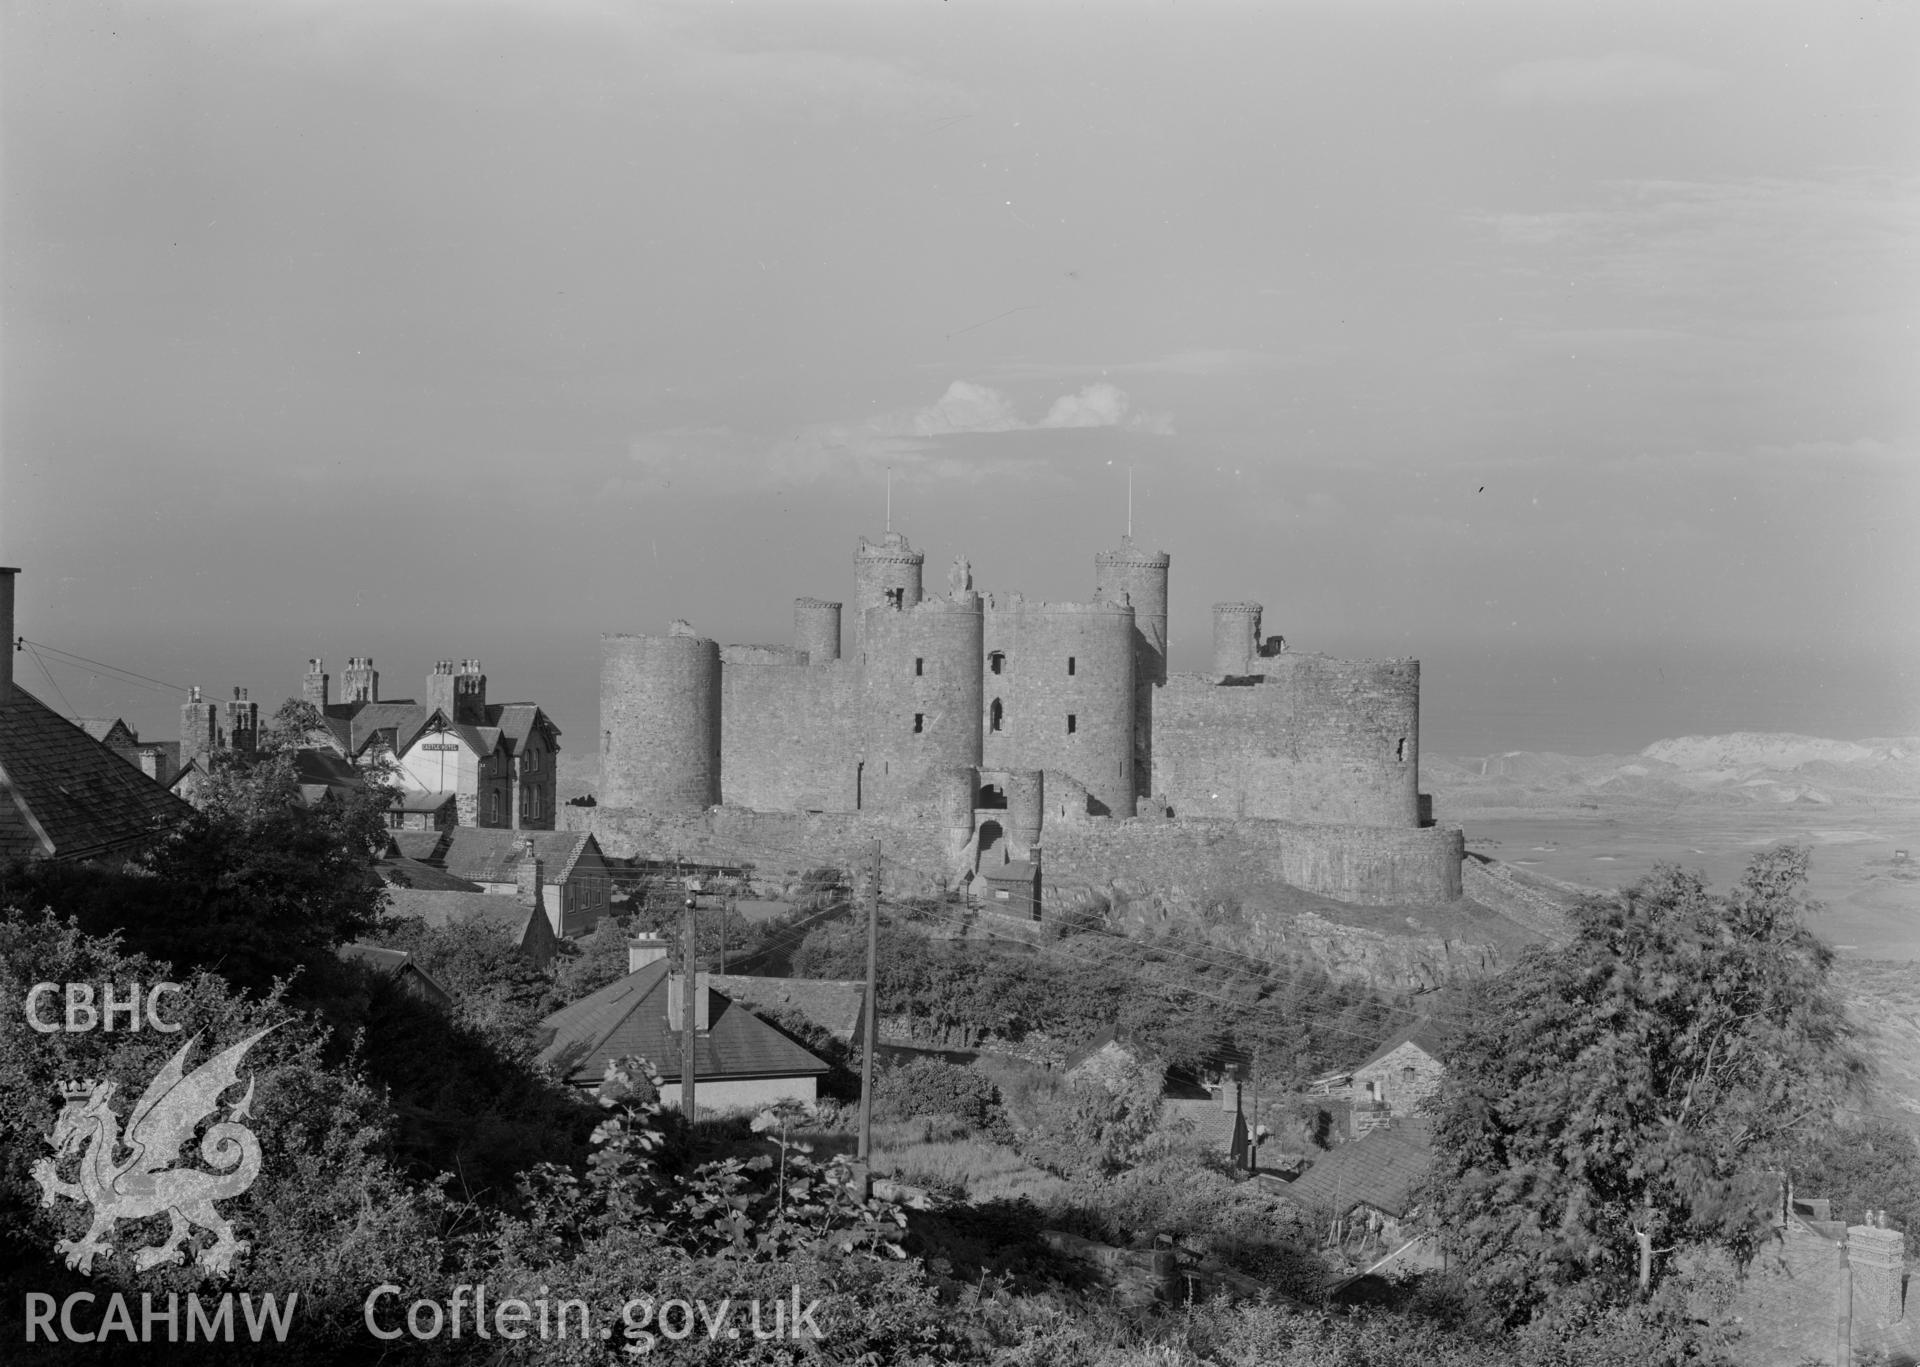 Digital copy of a nitrate negative showing view of Harlech Castle.